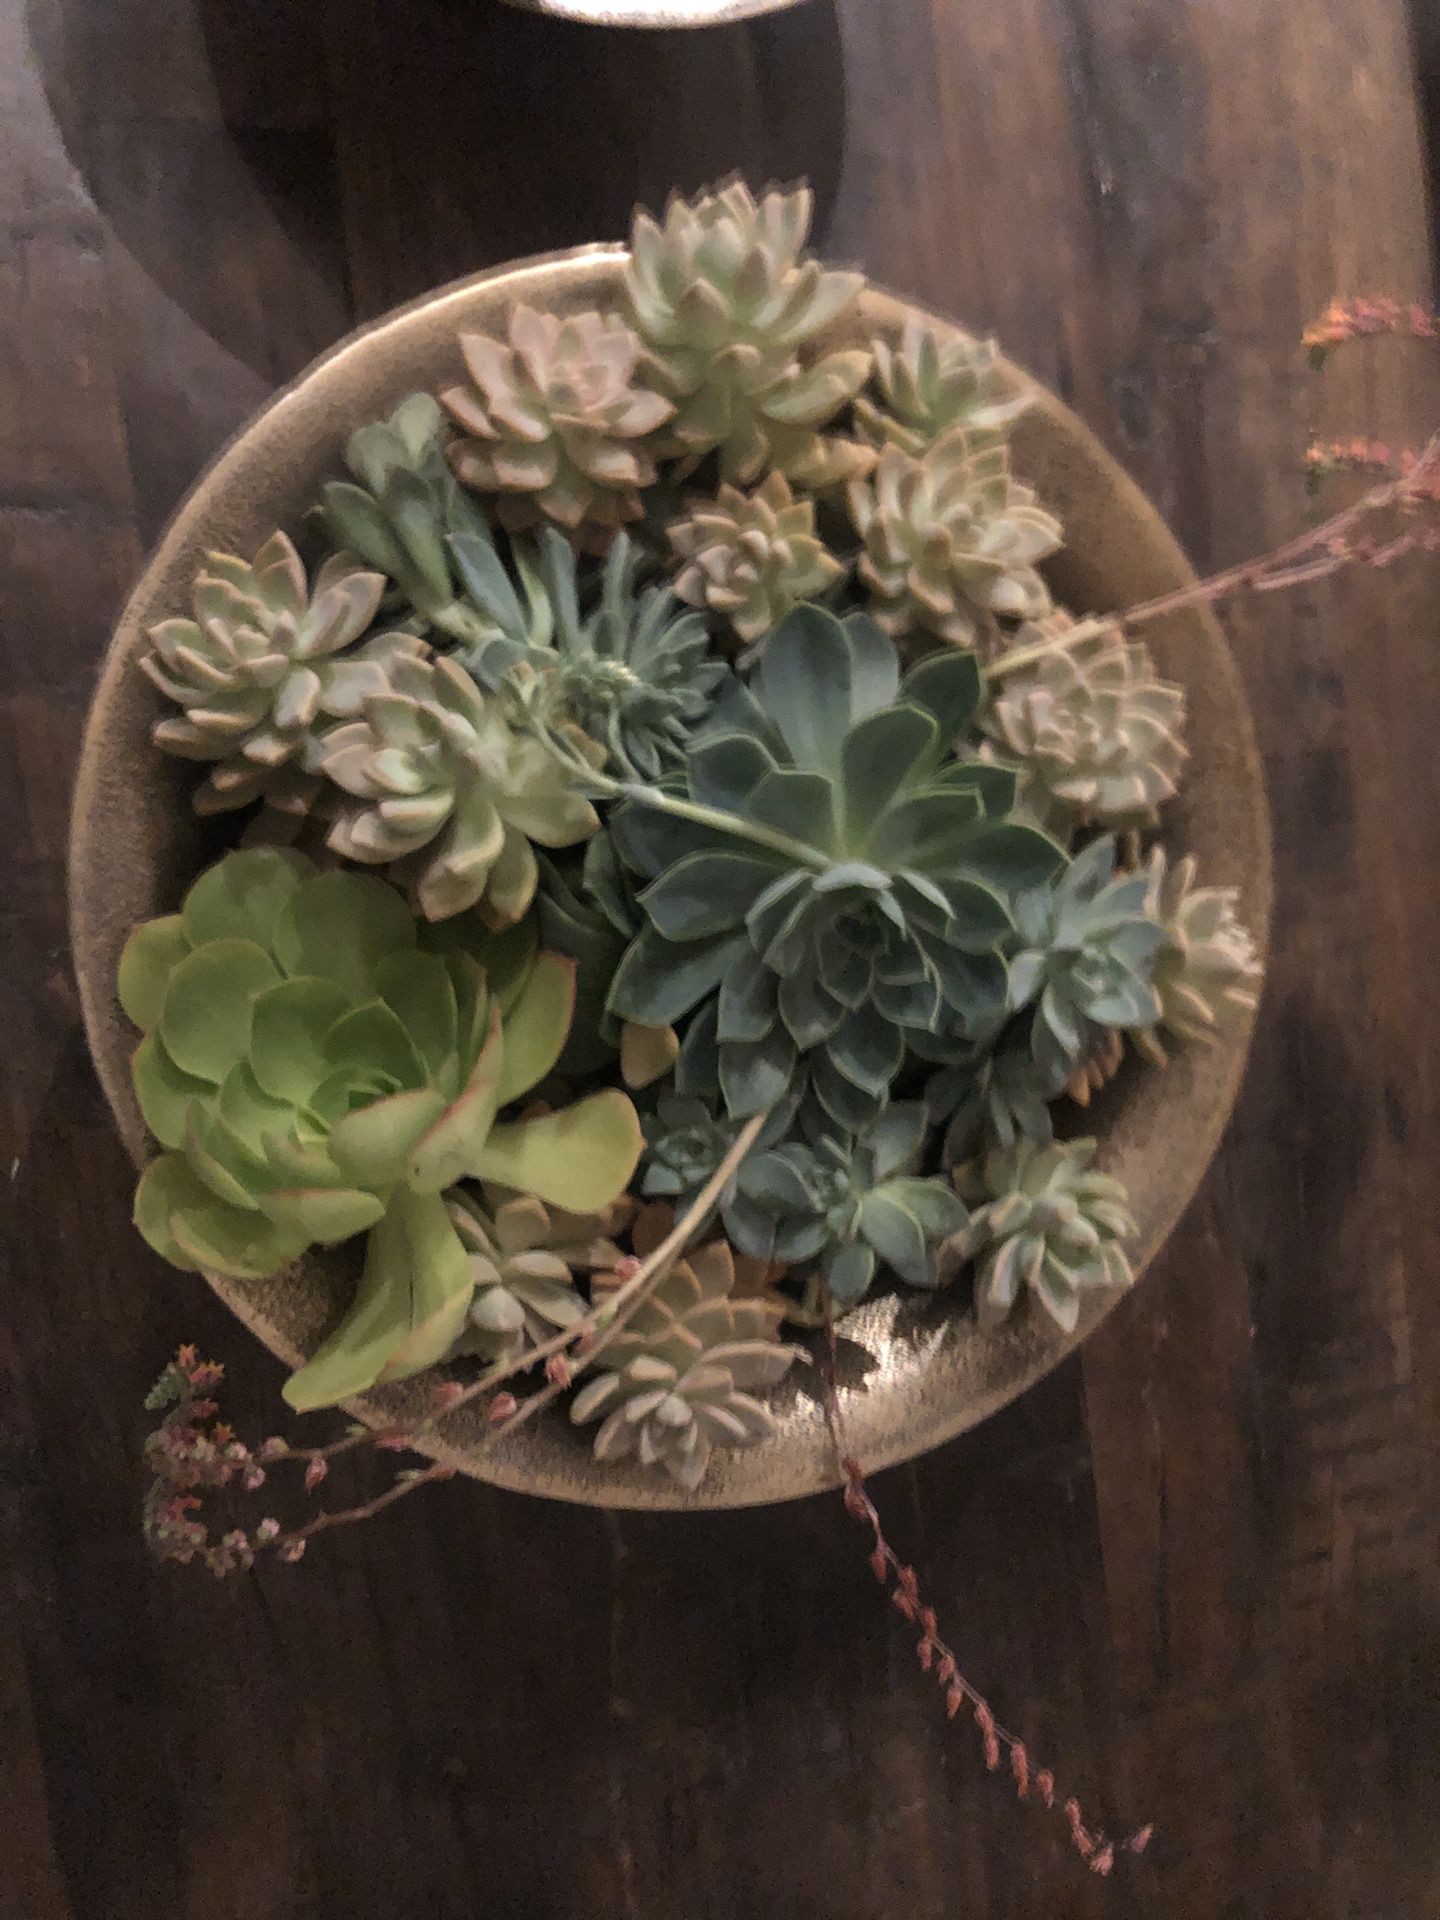 Affordable succulent display customs